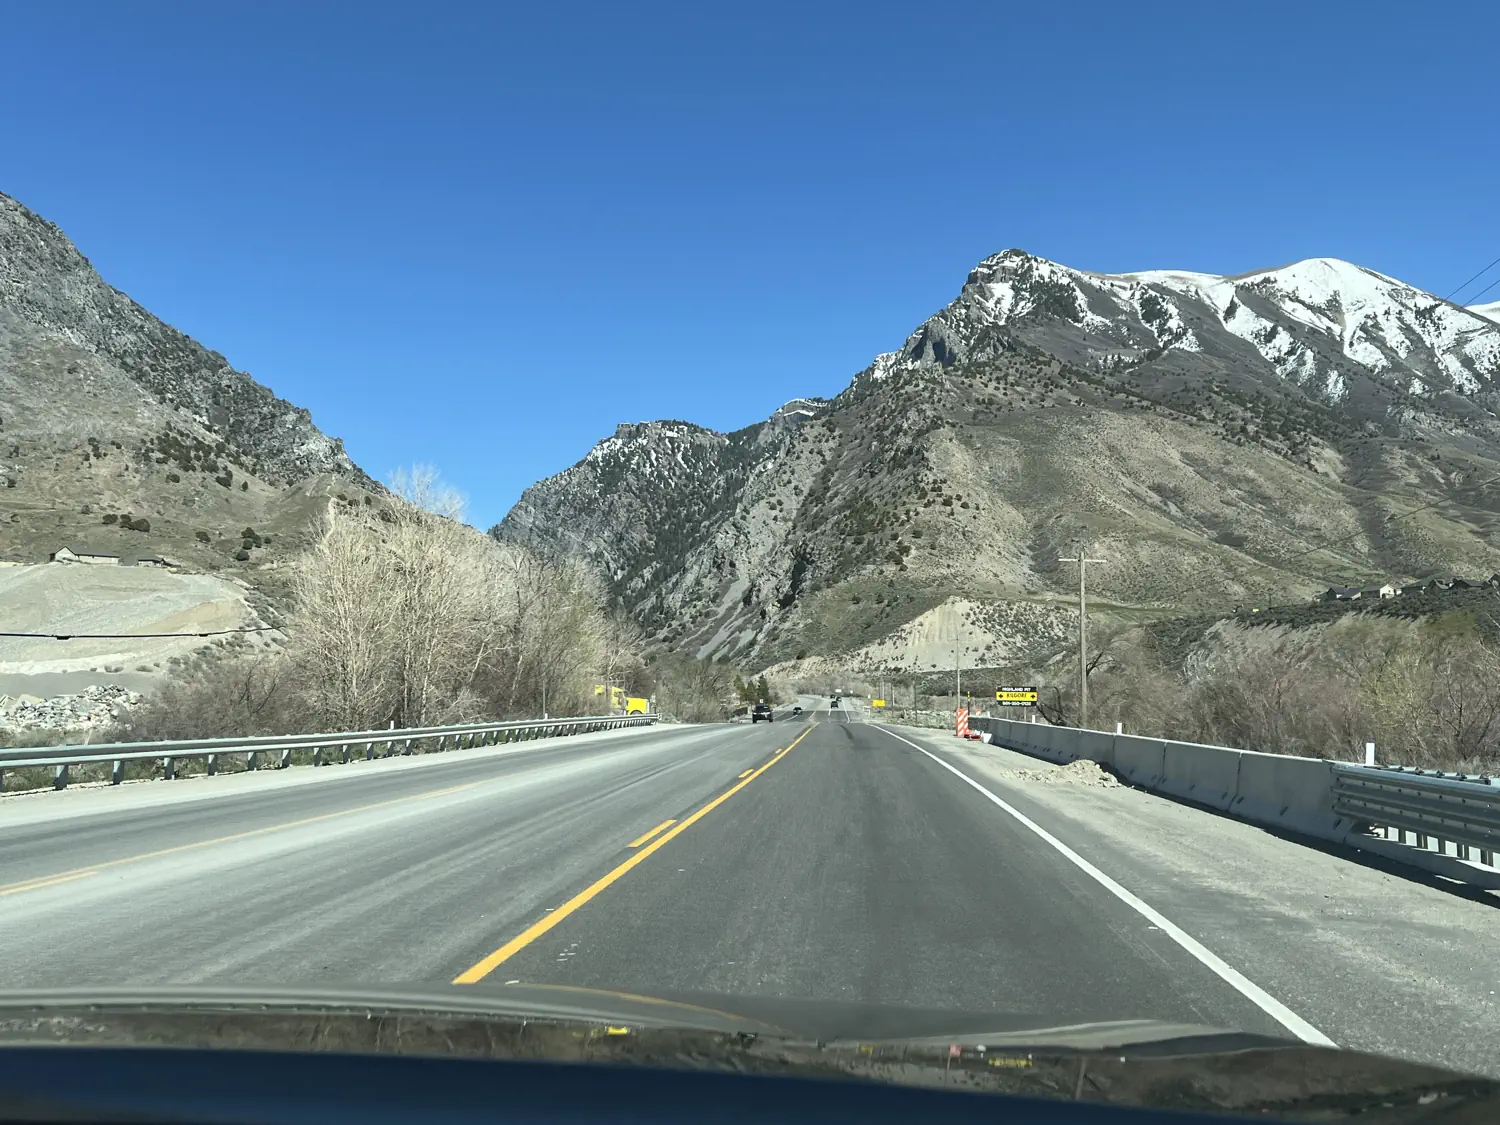 Approaching the entrance to American Fork Canyon